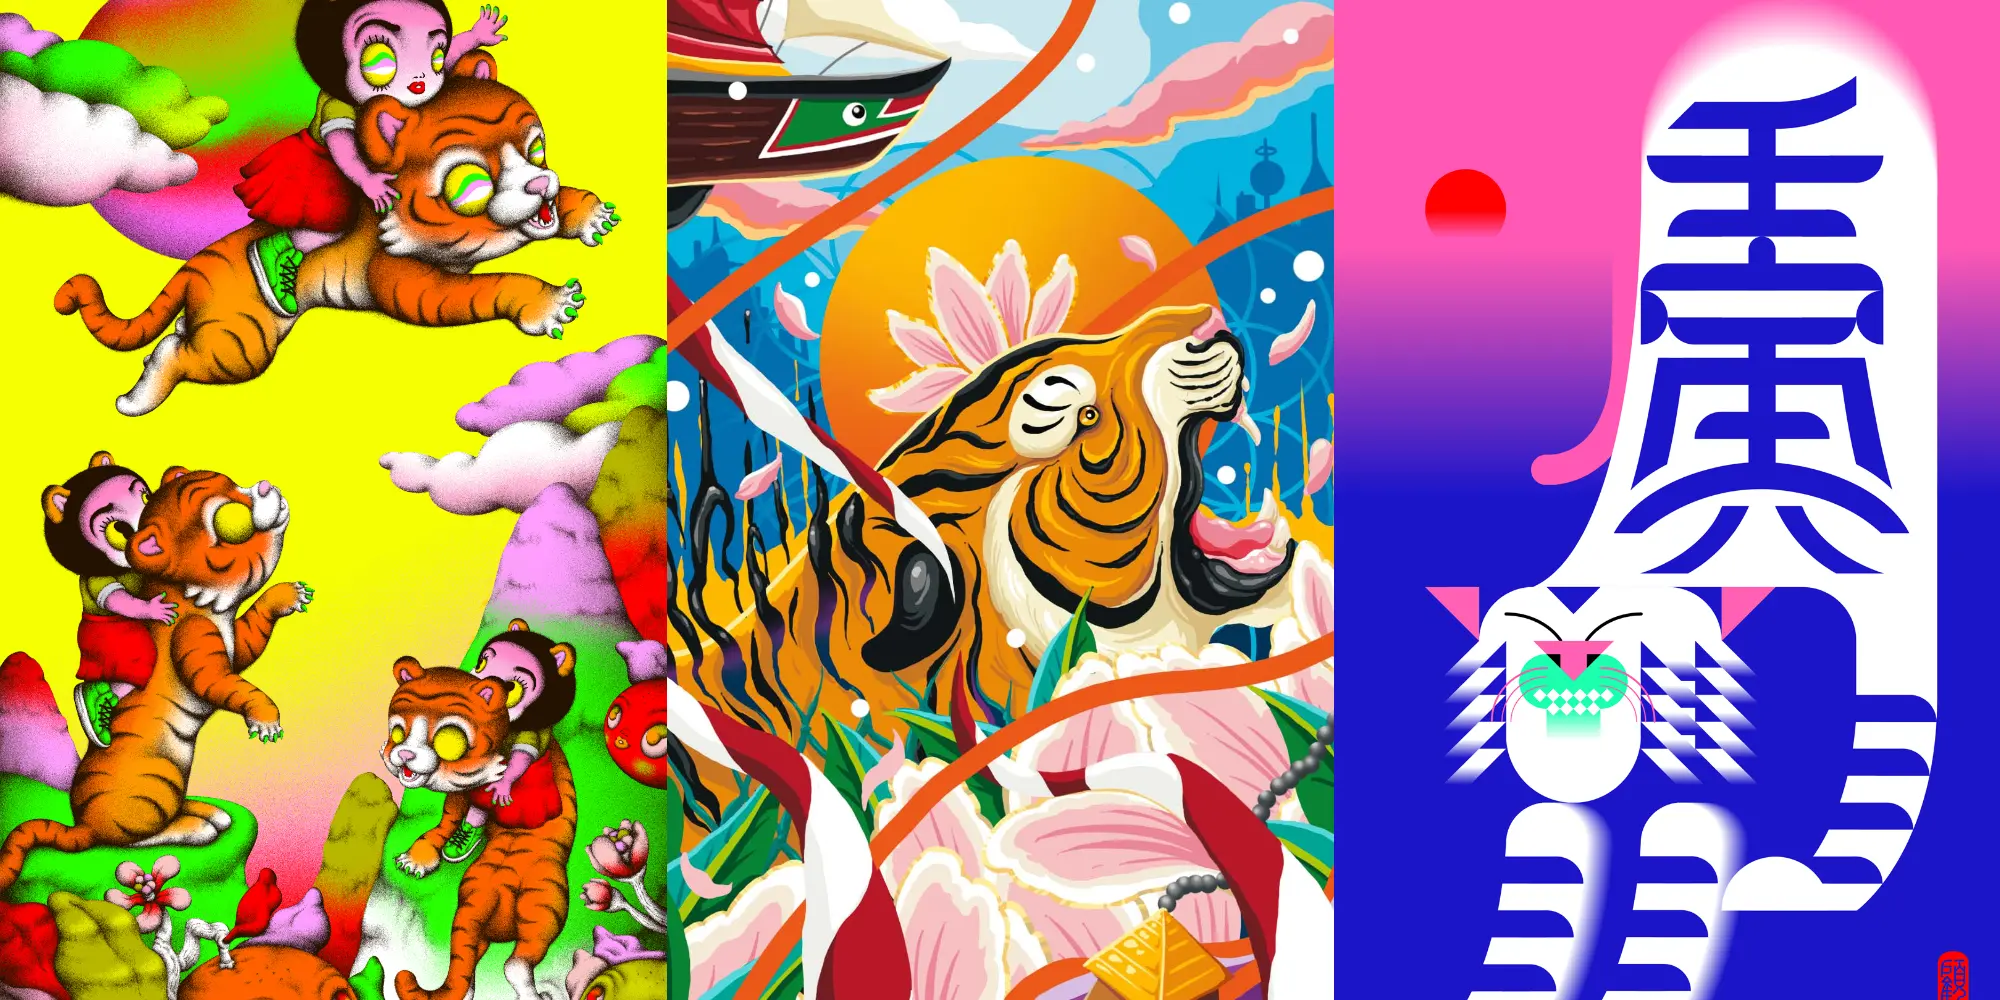 Collage of artwork representing the Year of the Tiger